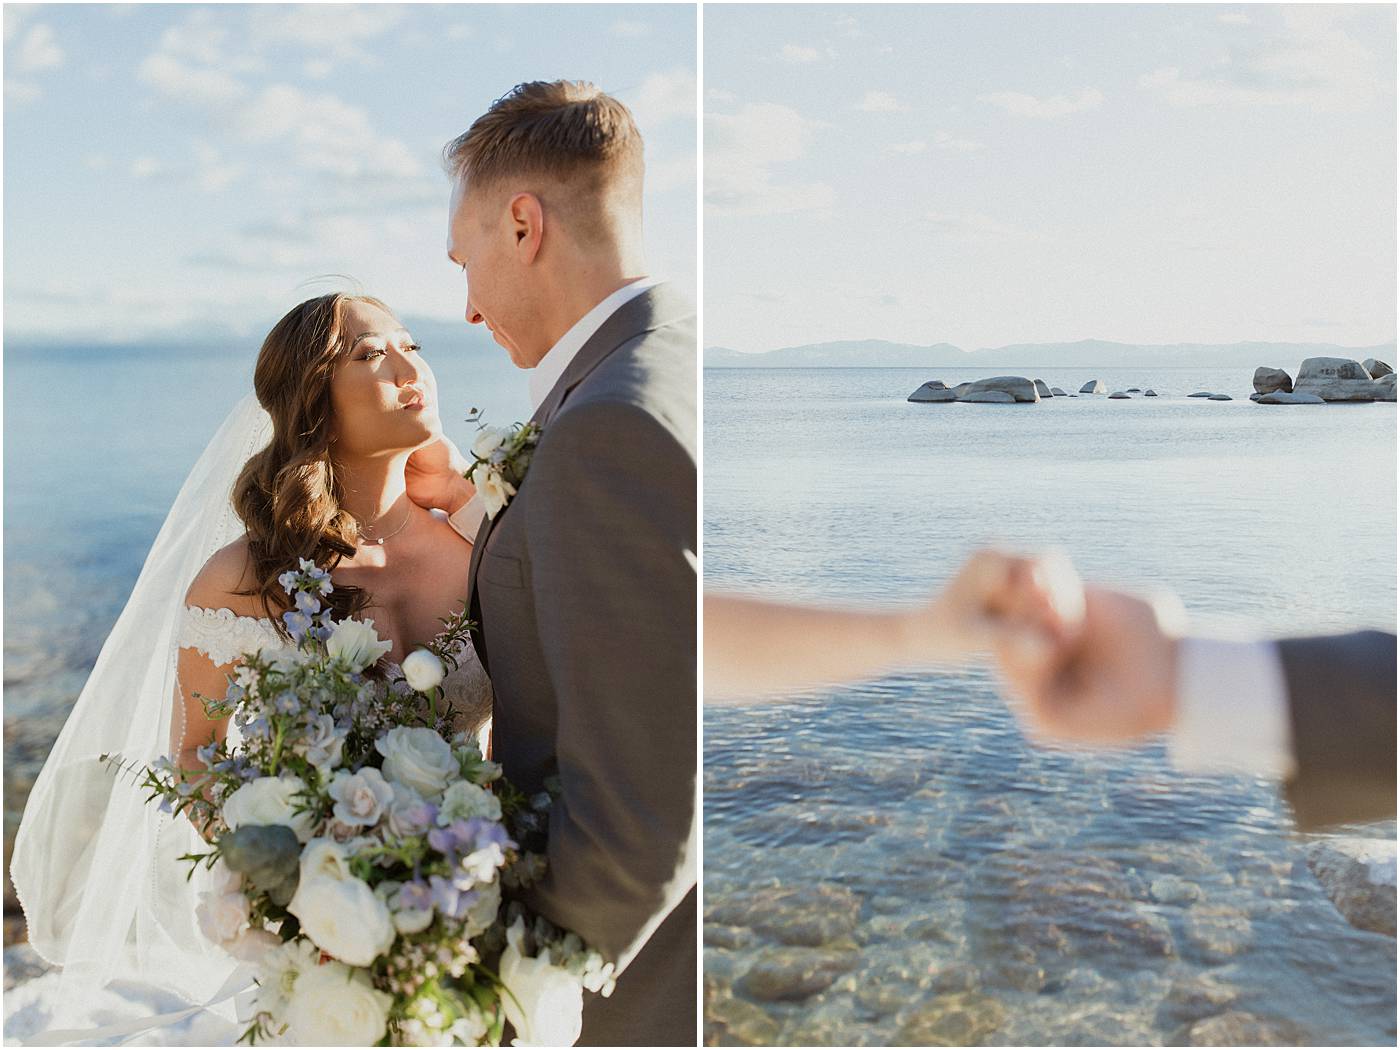 Just married Tahoe adventure photography